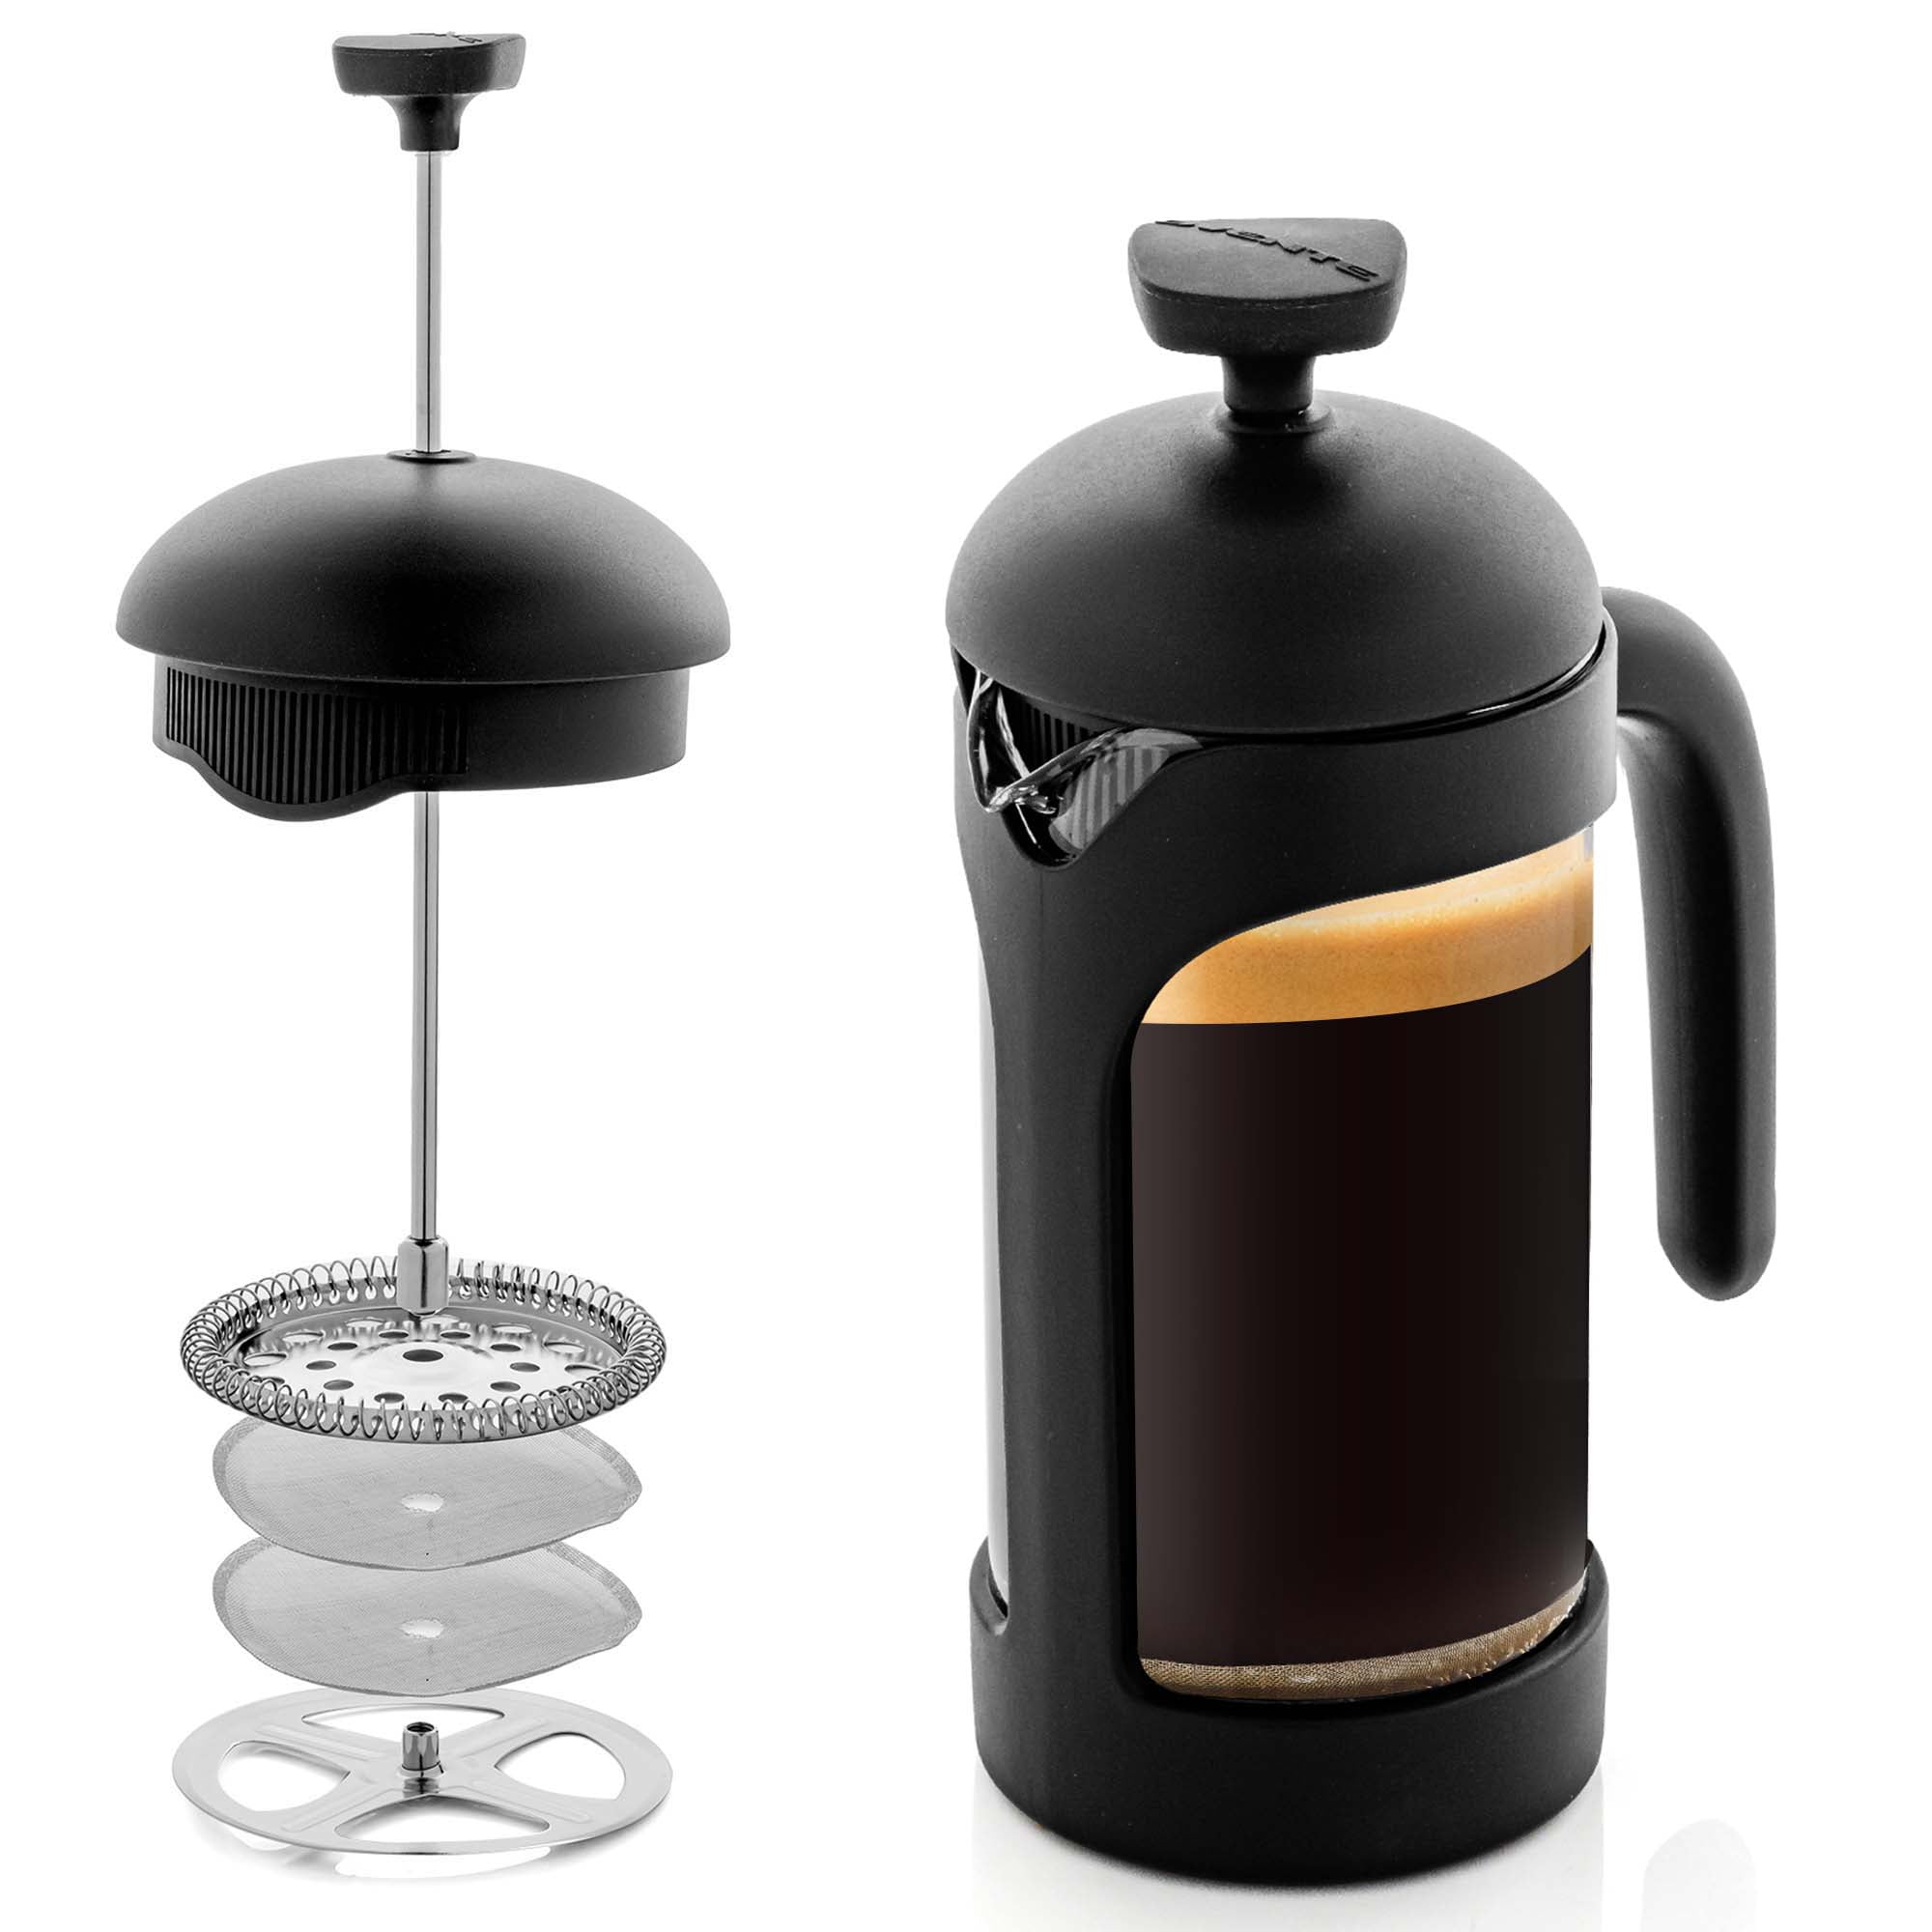 12 great gifts for coffee and tea lovers that aren't a waste of money